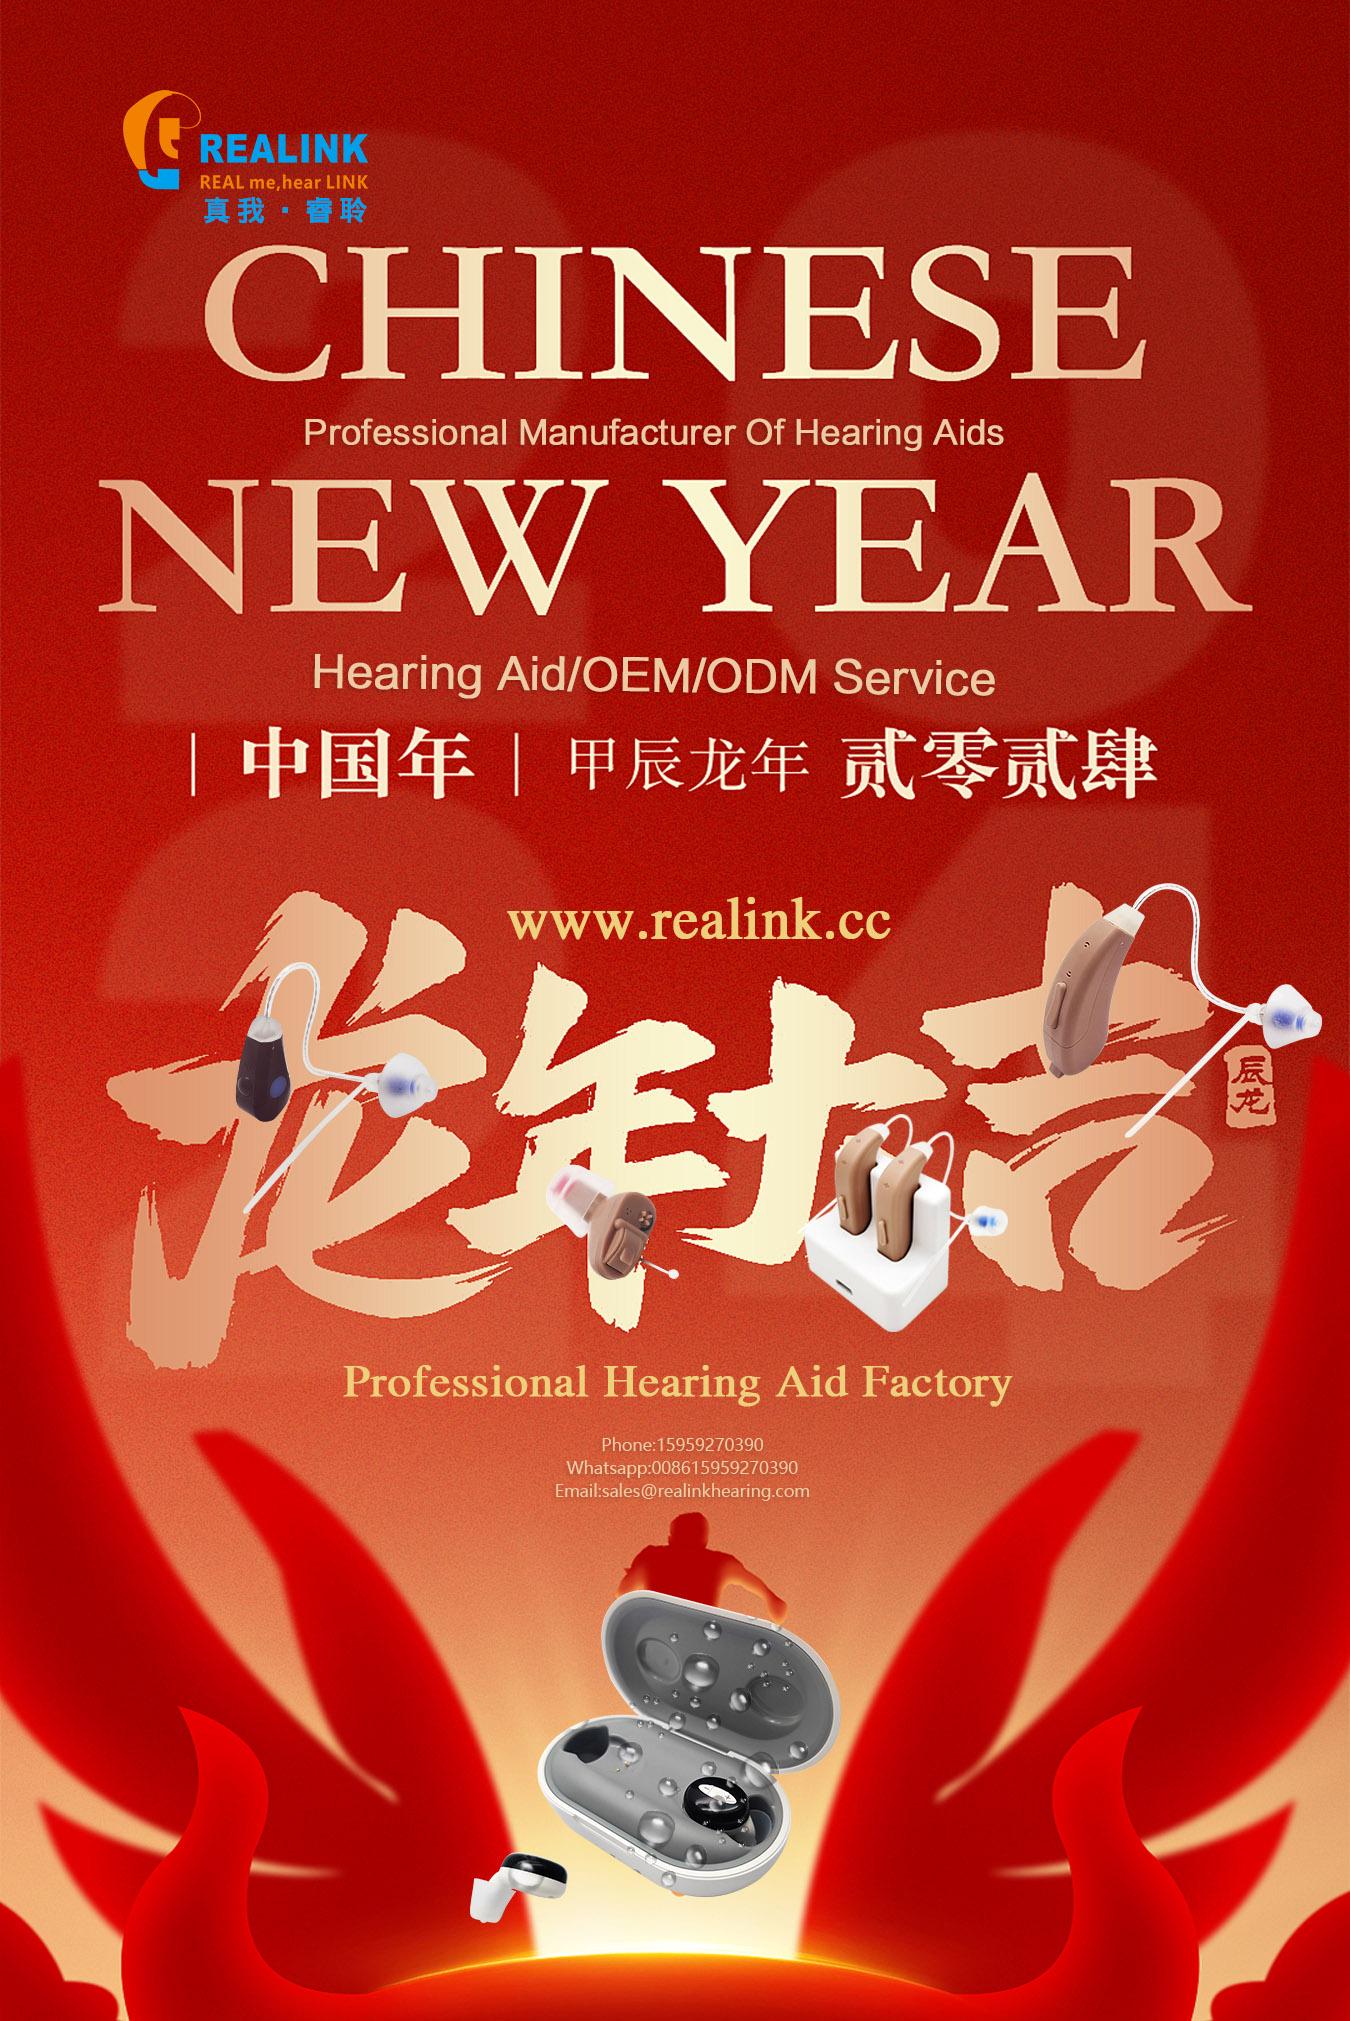 XIAMEN REALINK HEARING ：wish you all a happy new year and a happy new year's eve